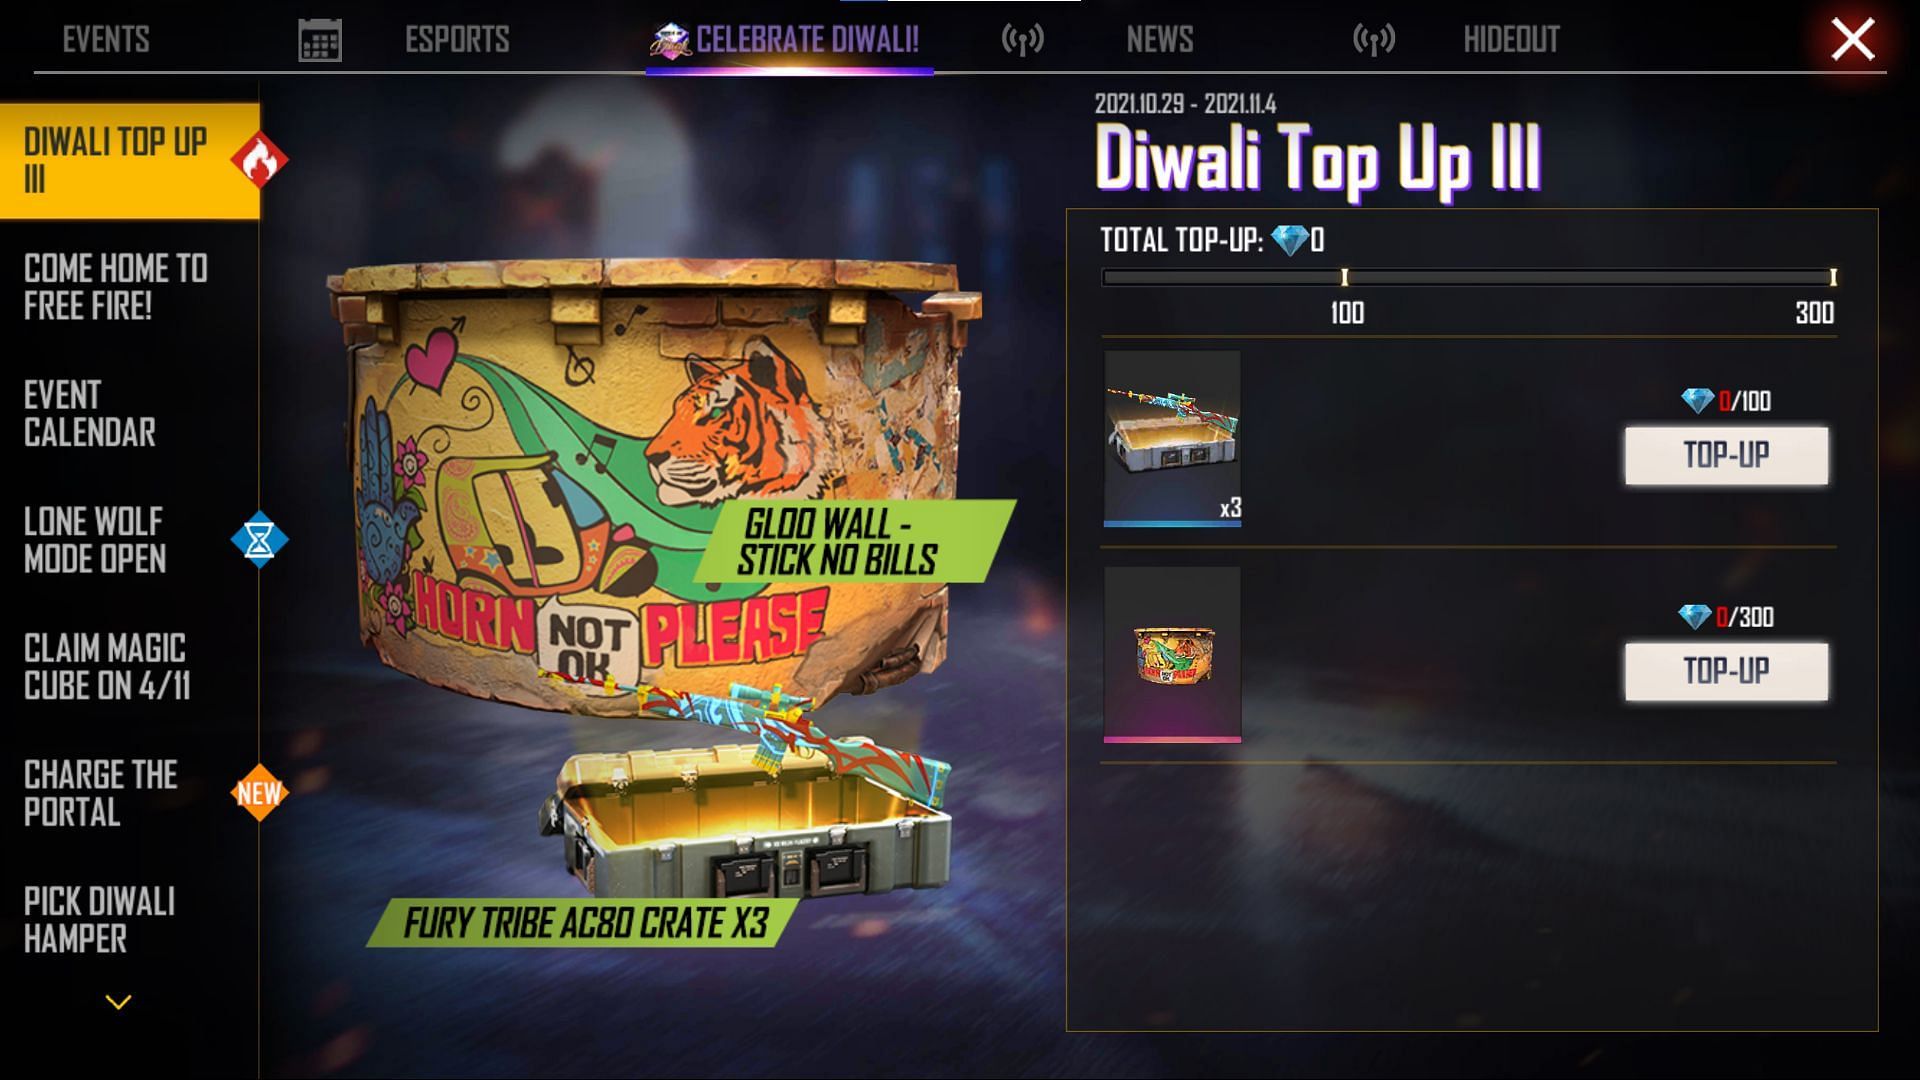 The last Gloo Wall available during Diwali Top Up III (Image via Free Fire)